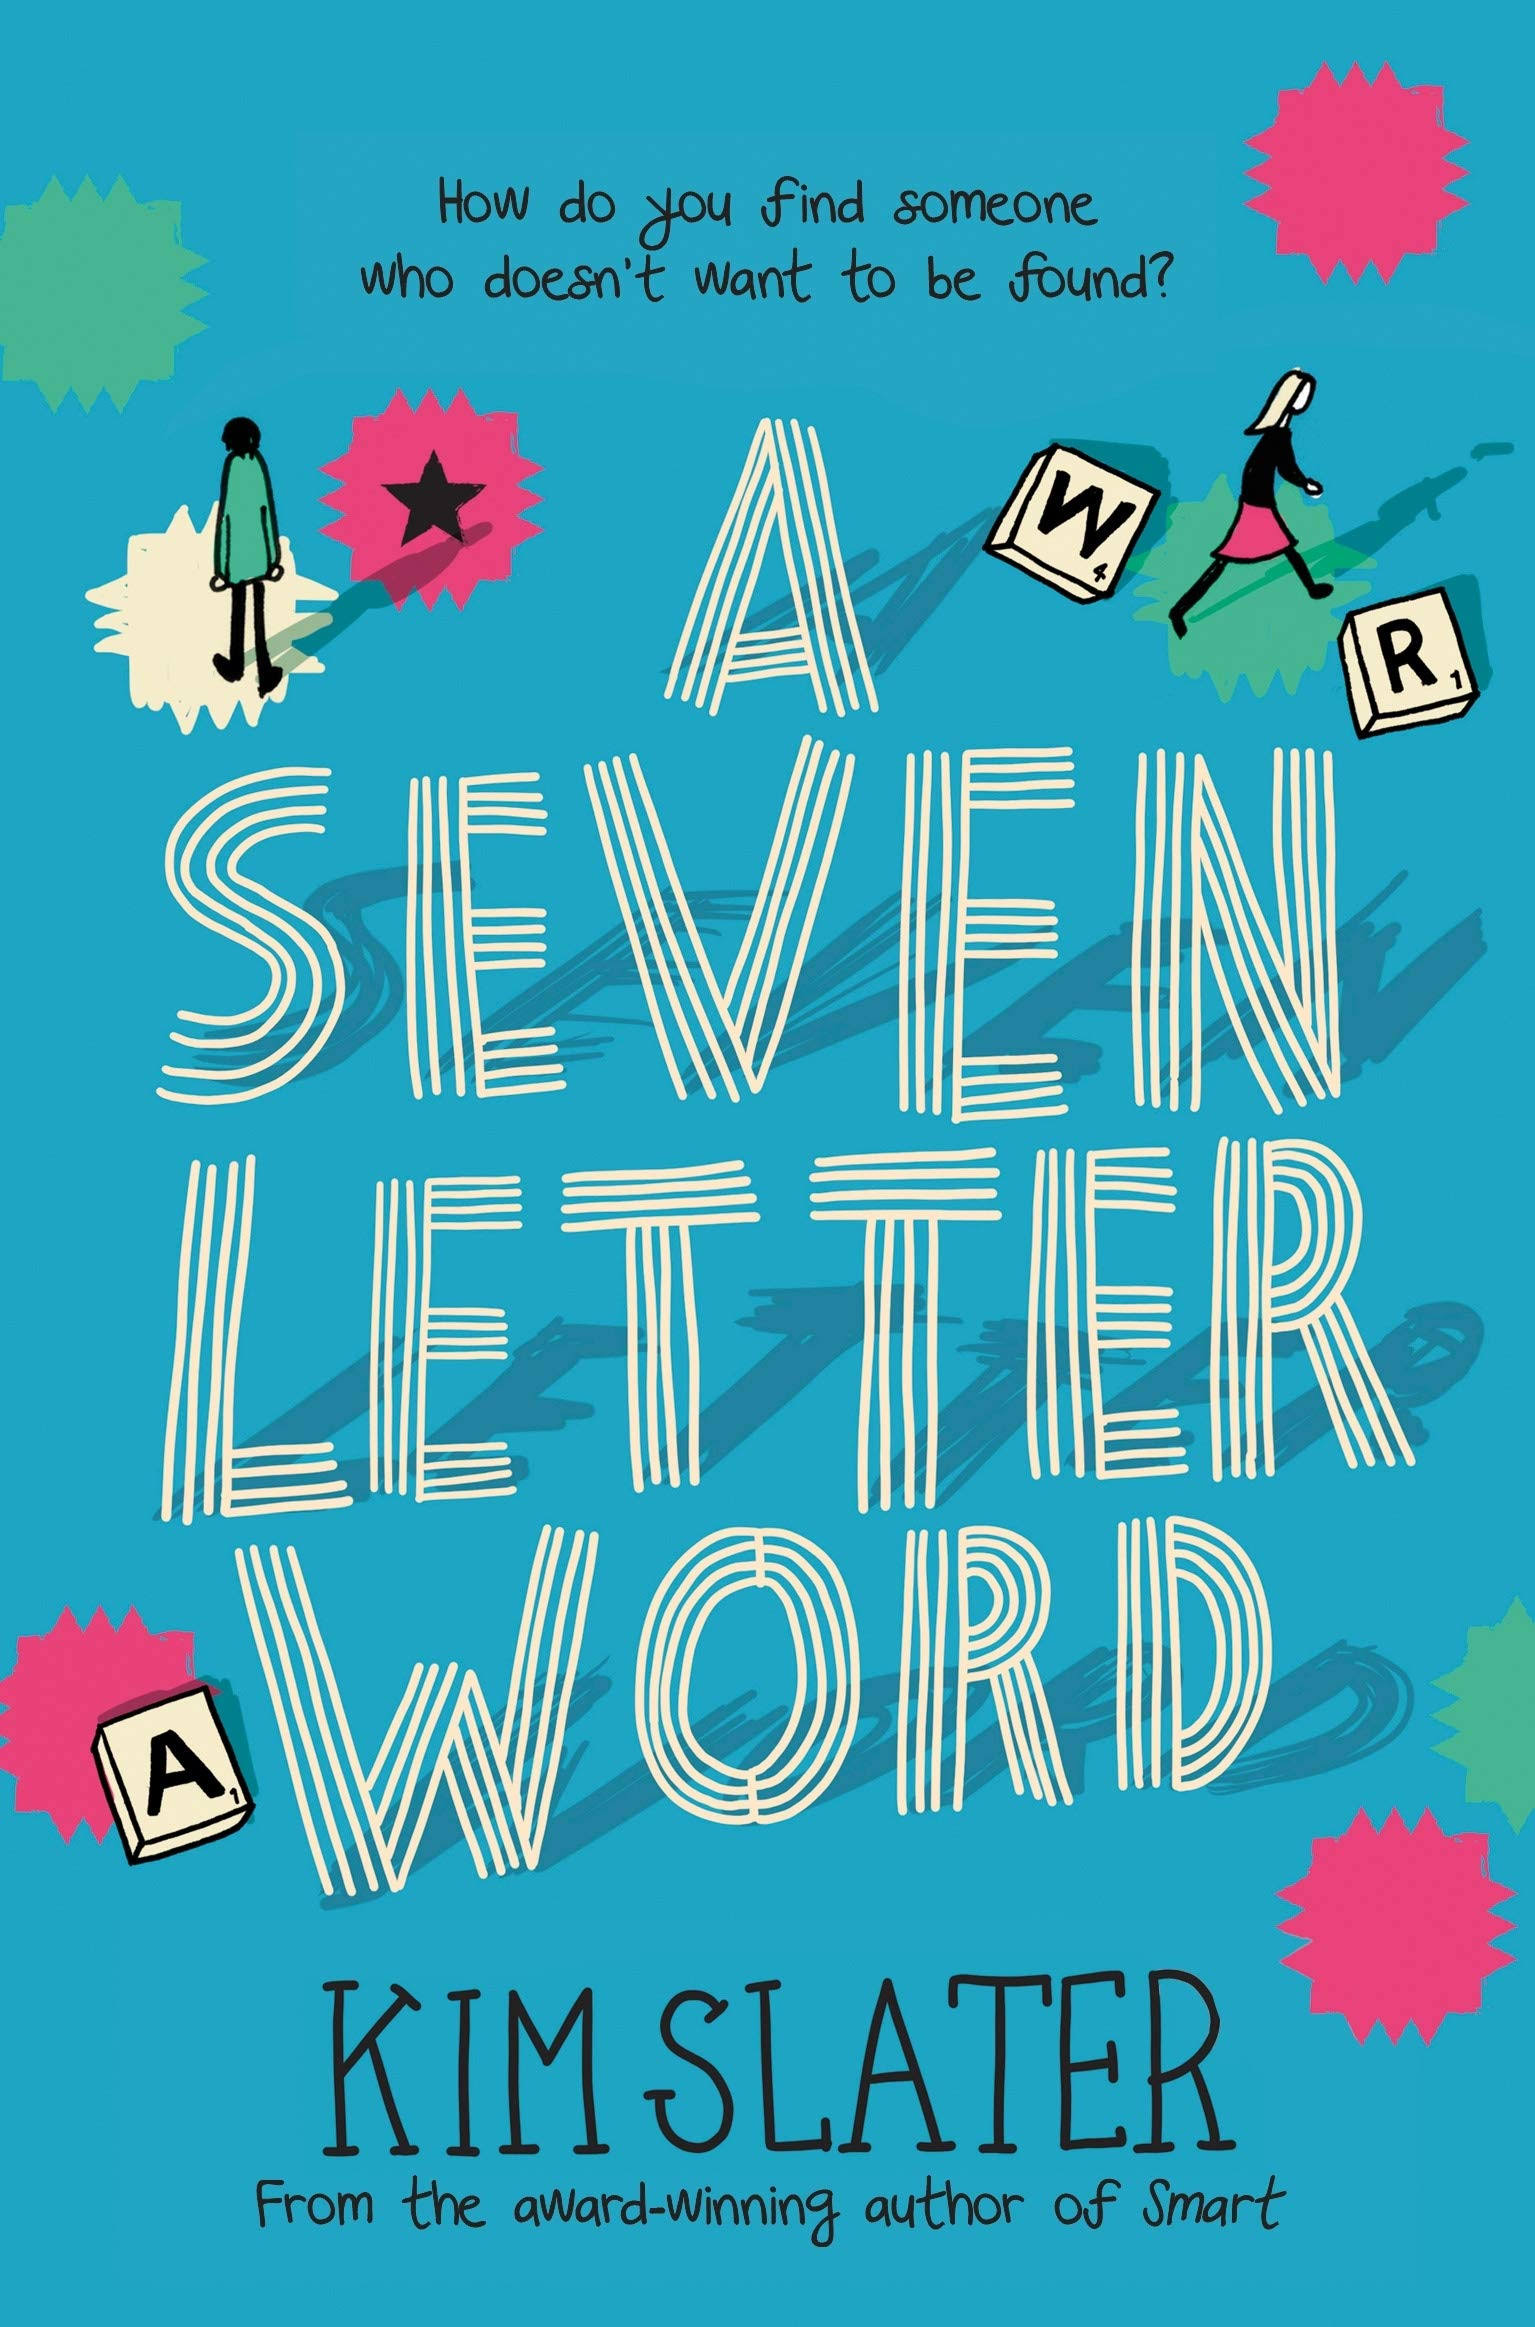 A Seven Letter Word by Kim Slater